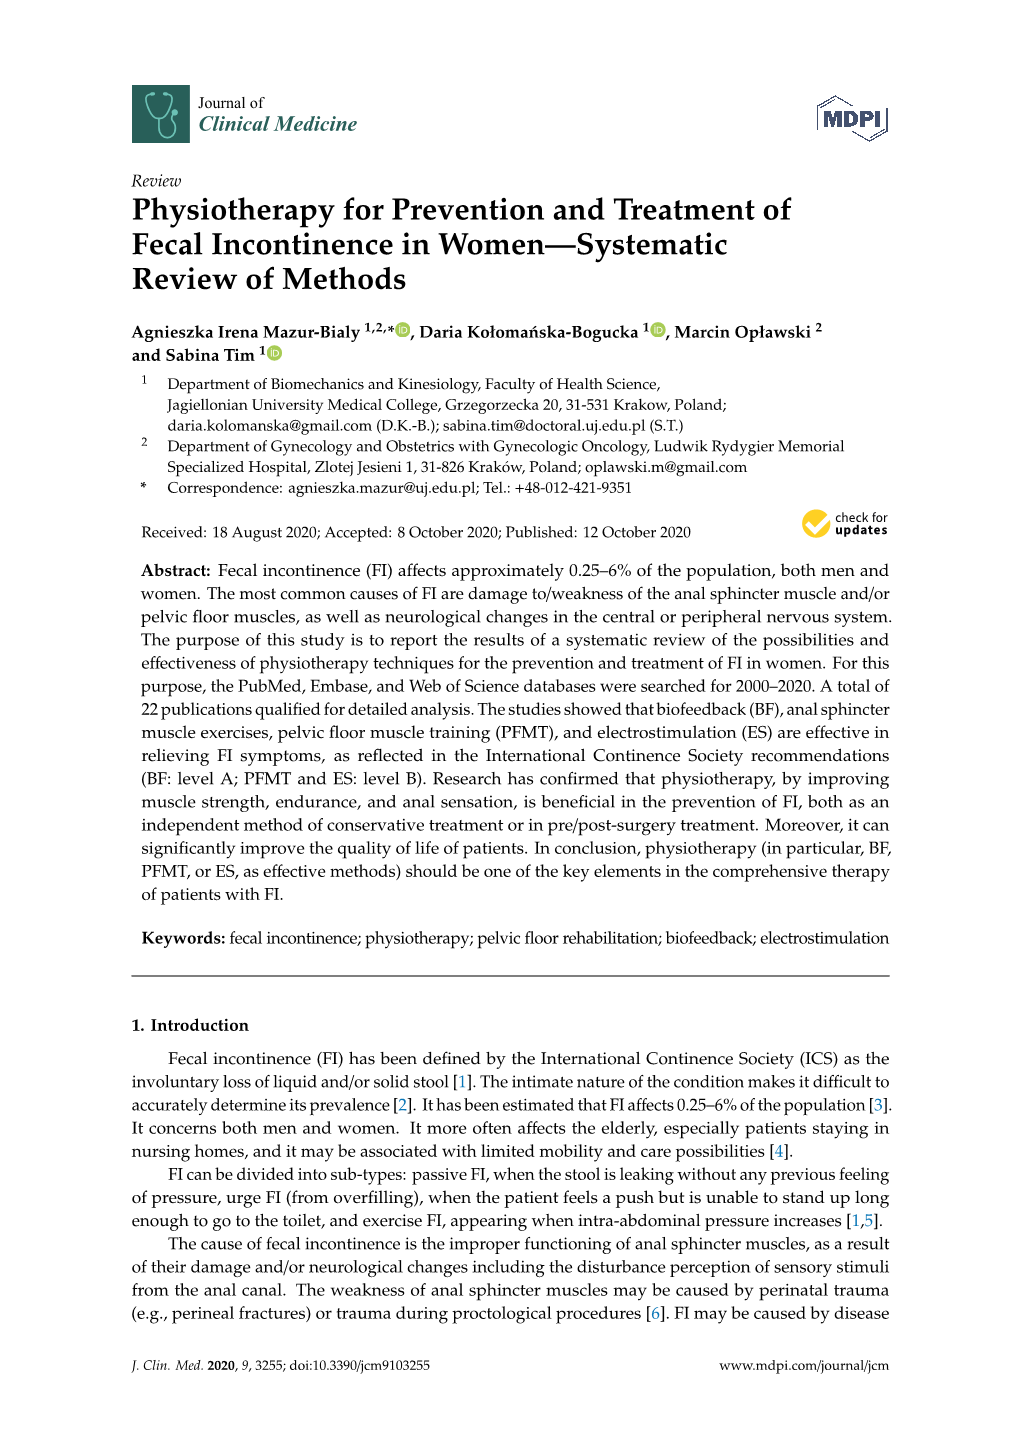 Physiotherapy for Prevention and Treatment of Fecal Incontinence in Women—Systematic Review of Methods